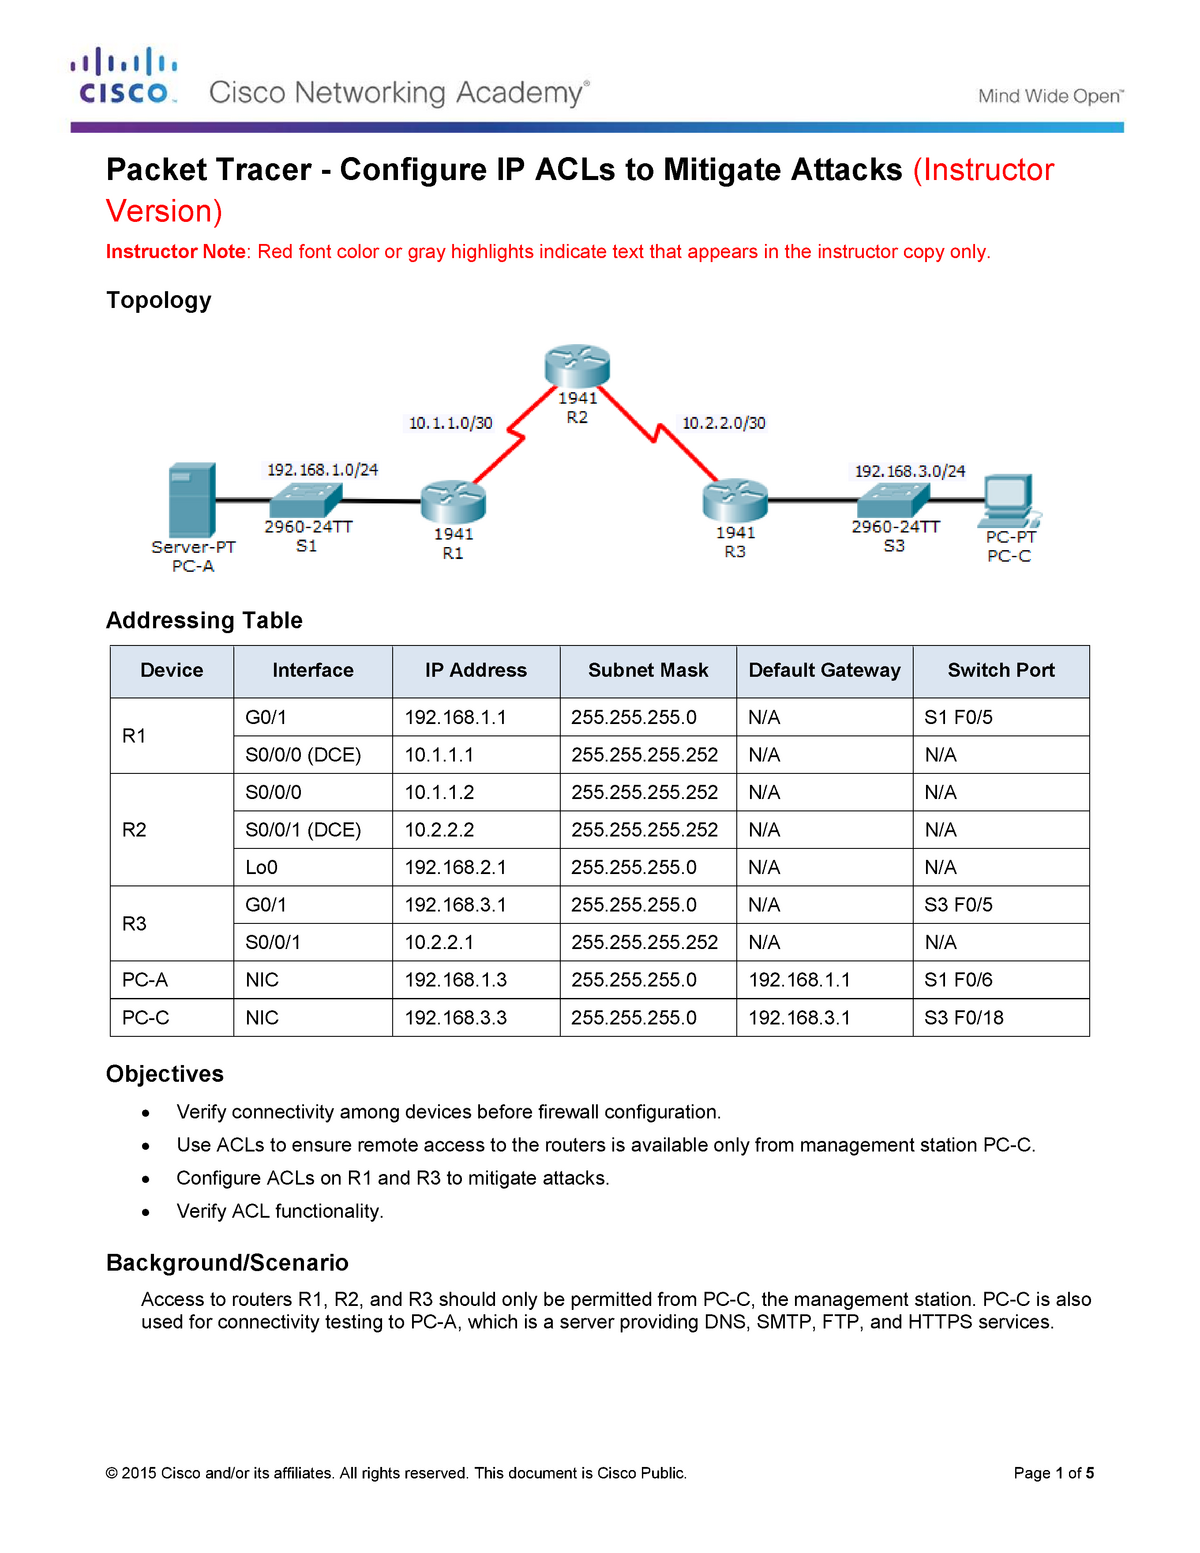 4.1.2.5 packet tracer activity